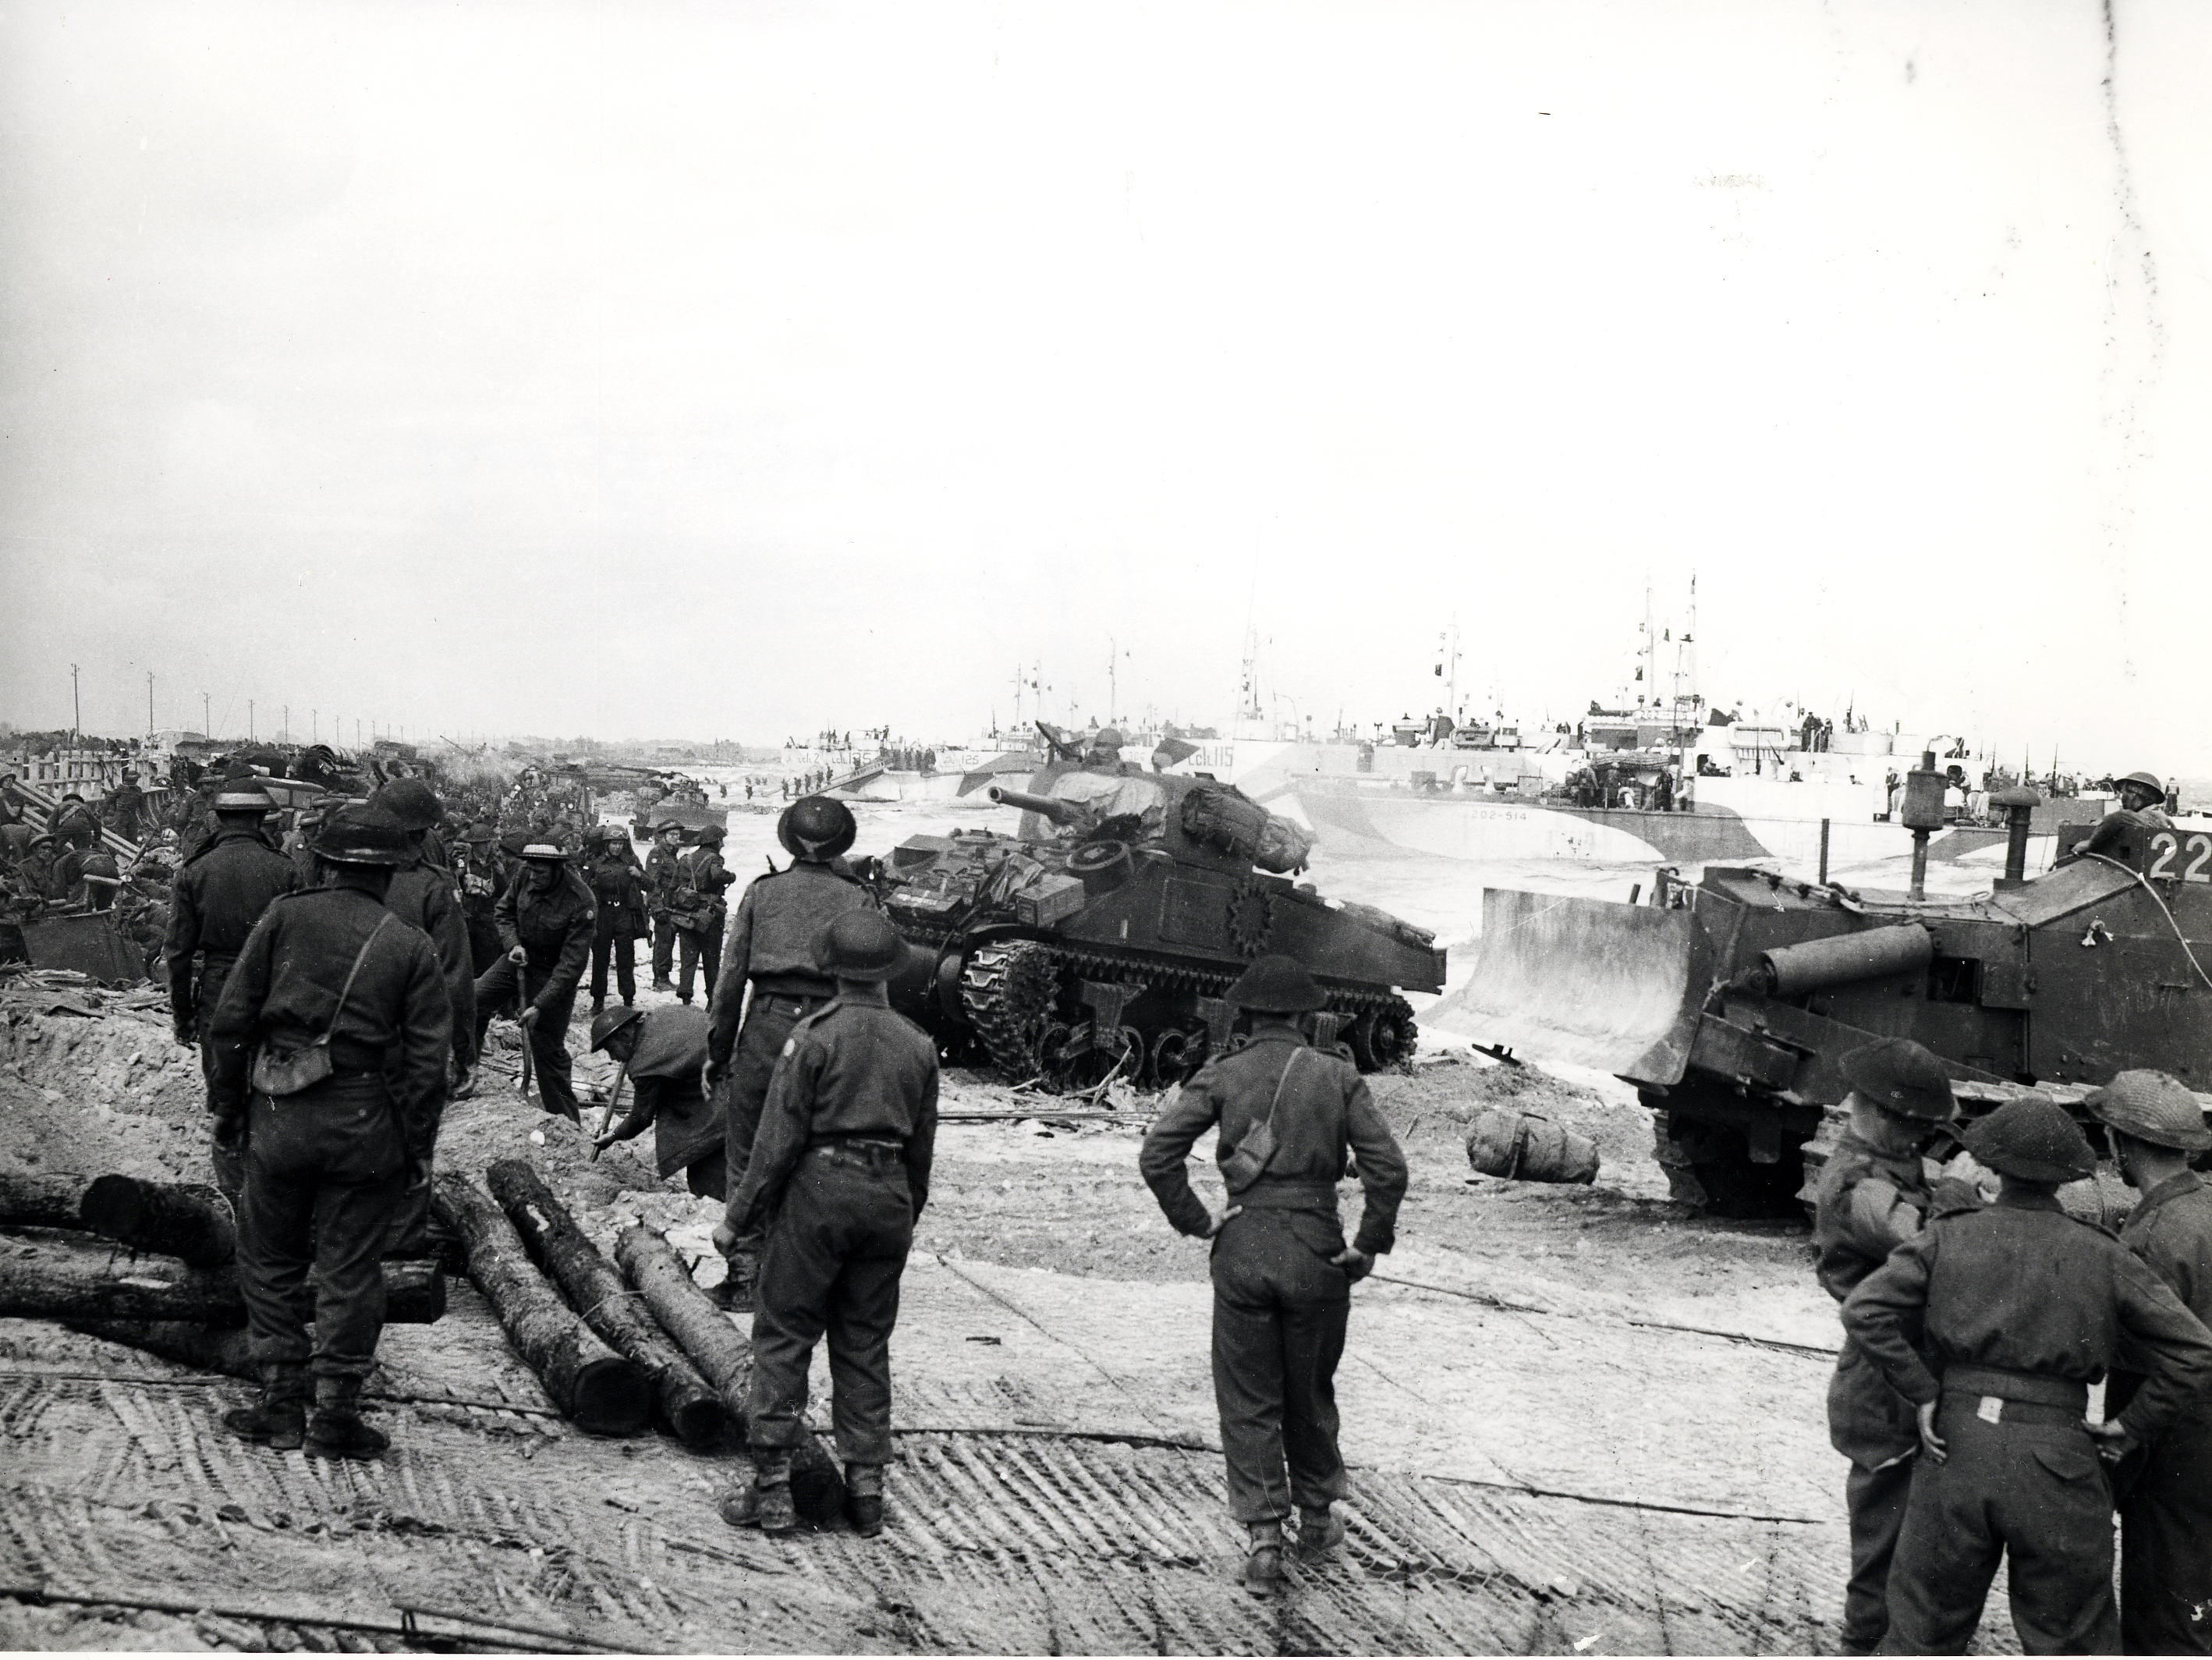 Canadian soldiers and tanks landing at Courseulles-sur-Mer, France, on June 6, 1944.